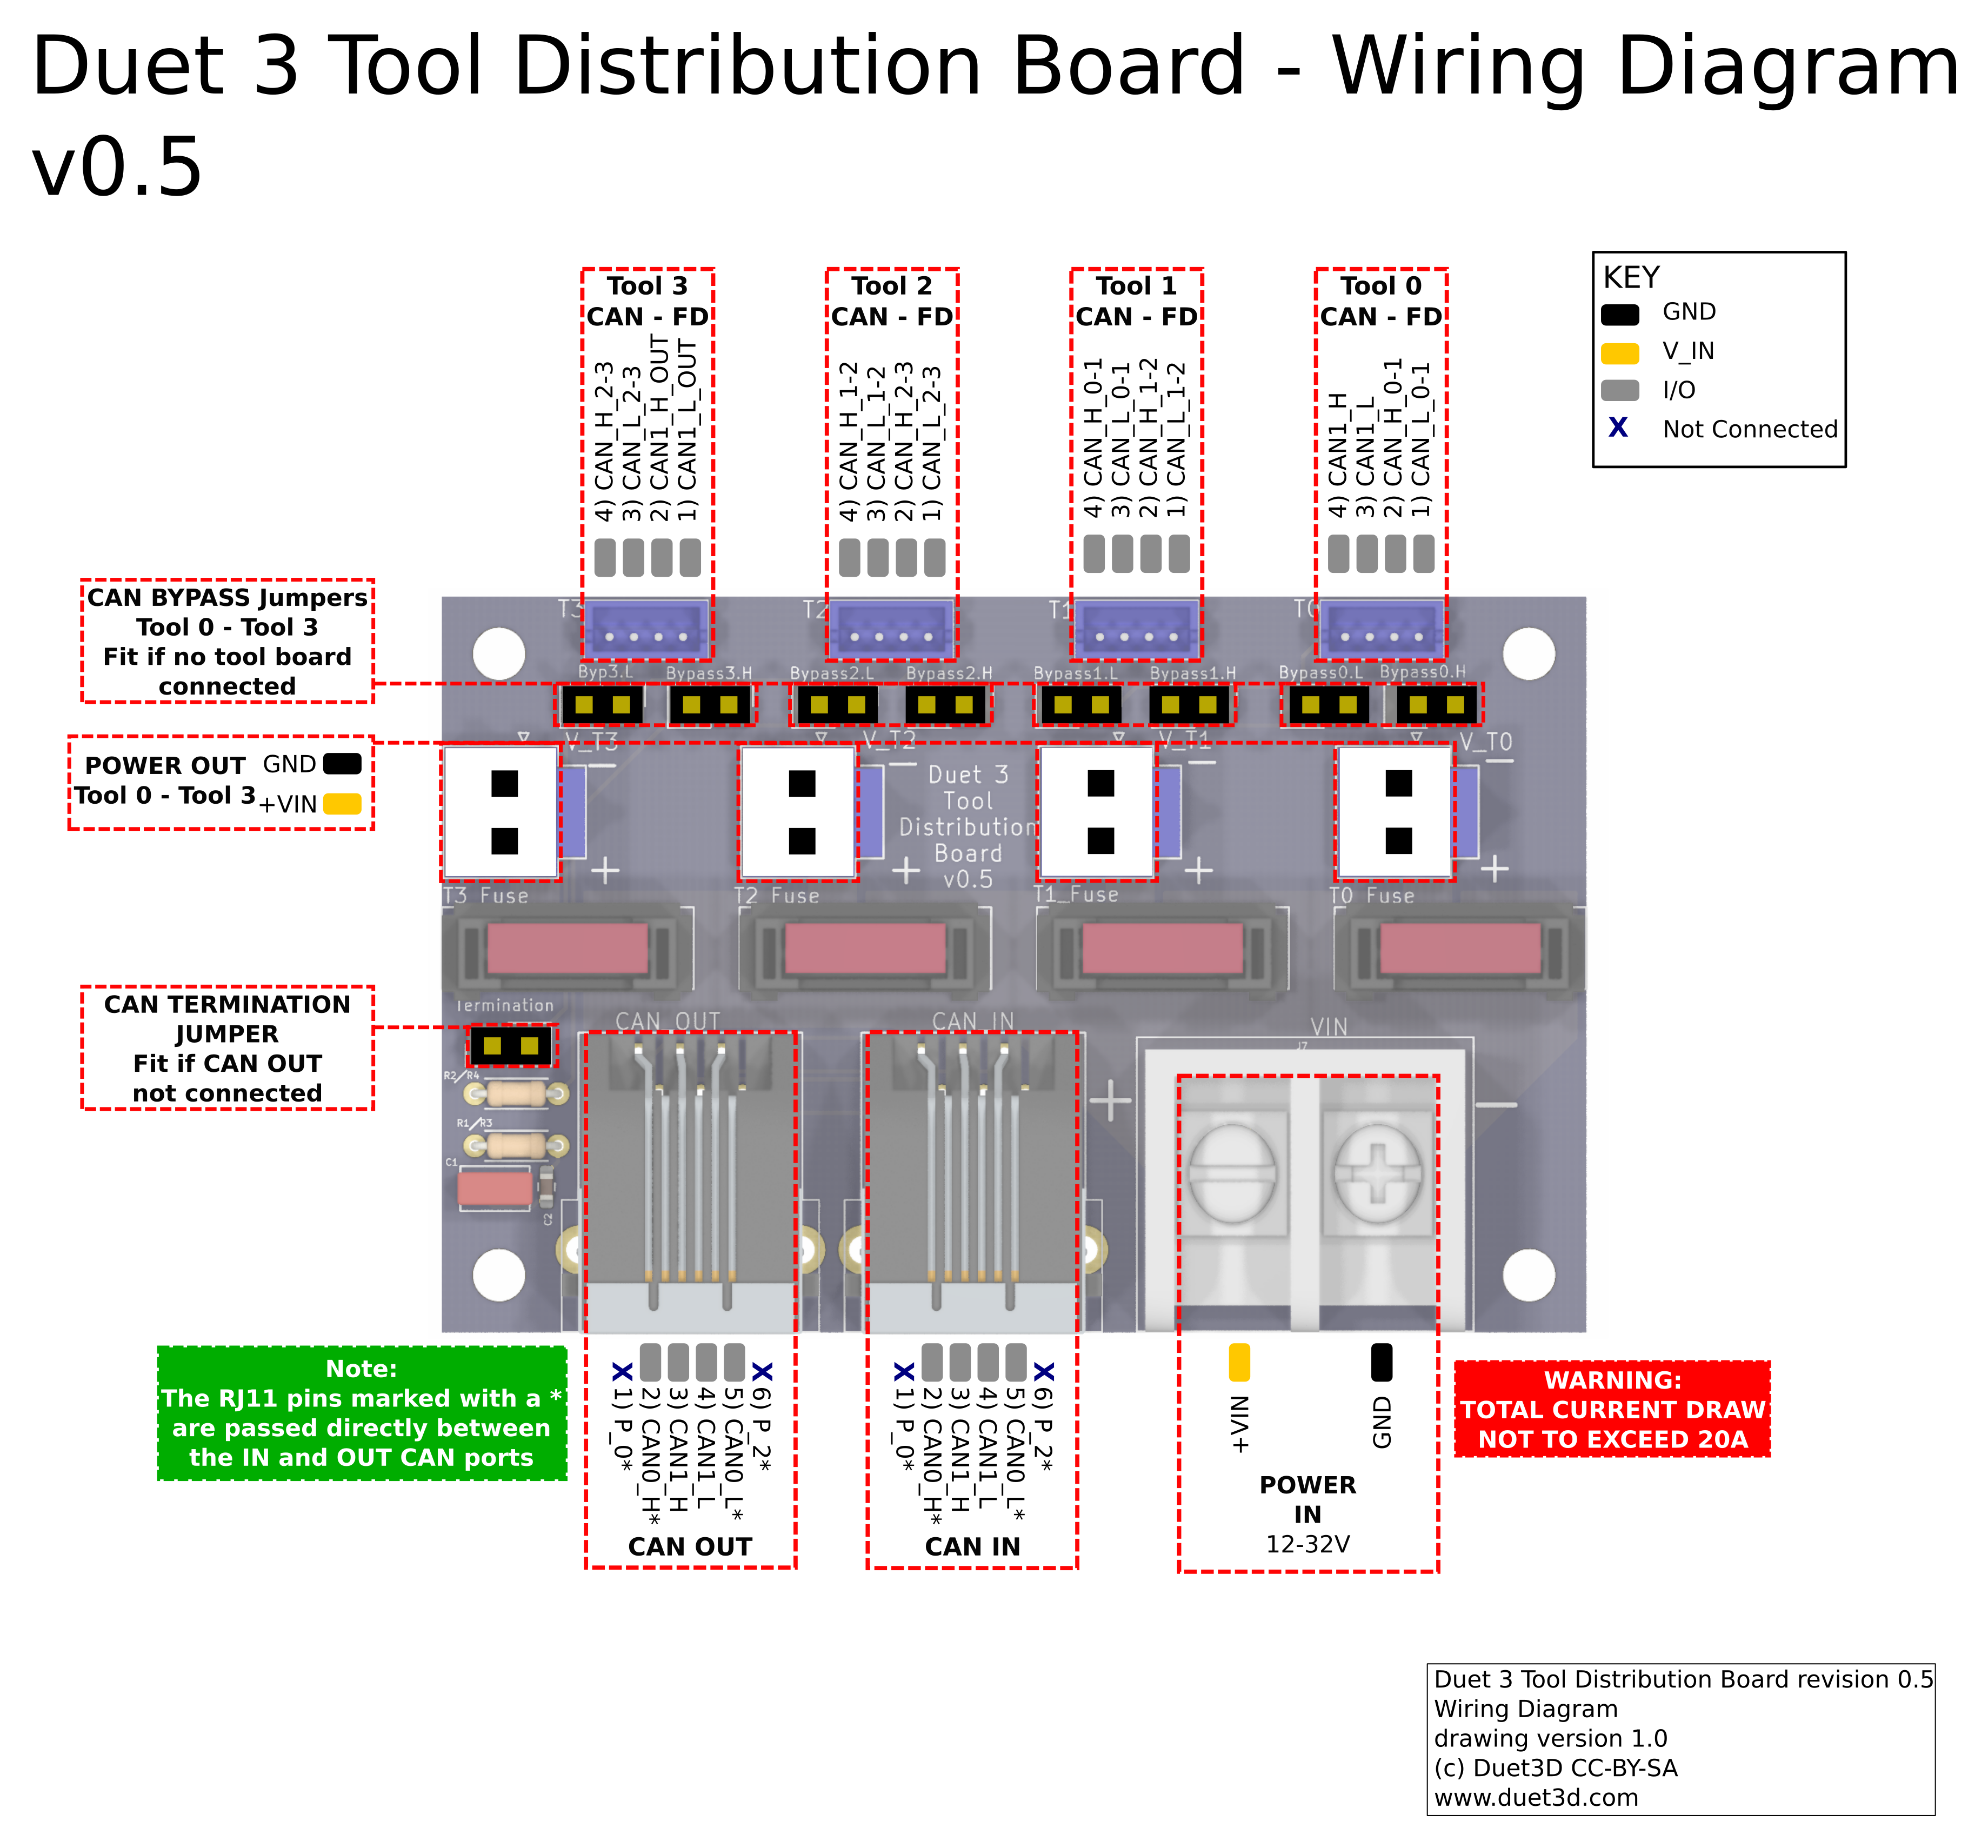 duet_3_tool_distribution_board_v0.5_wiring.png